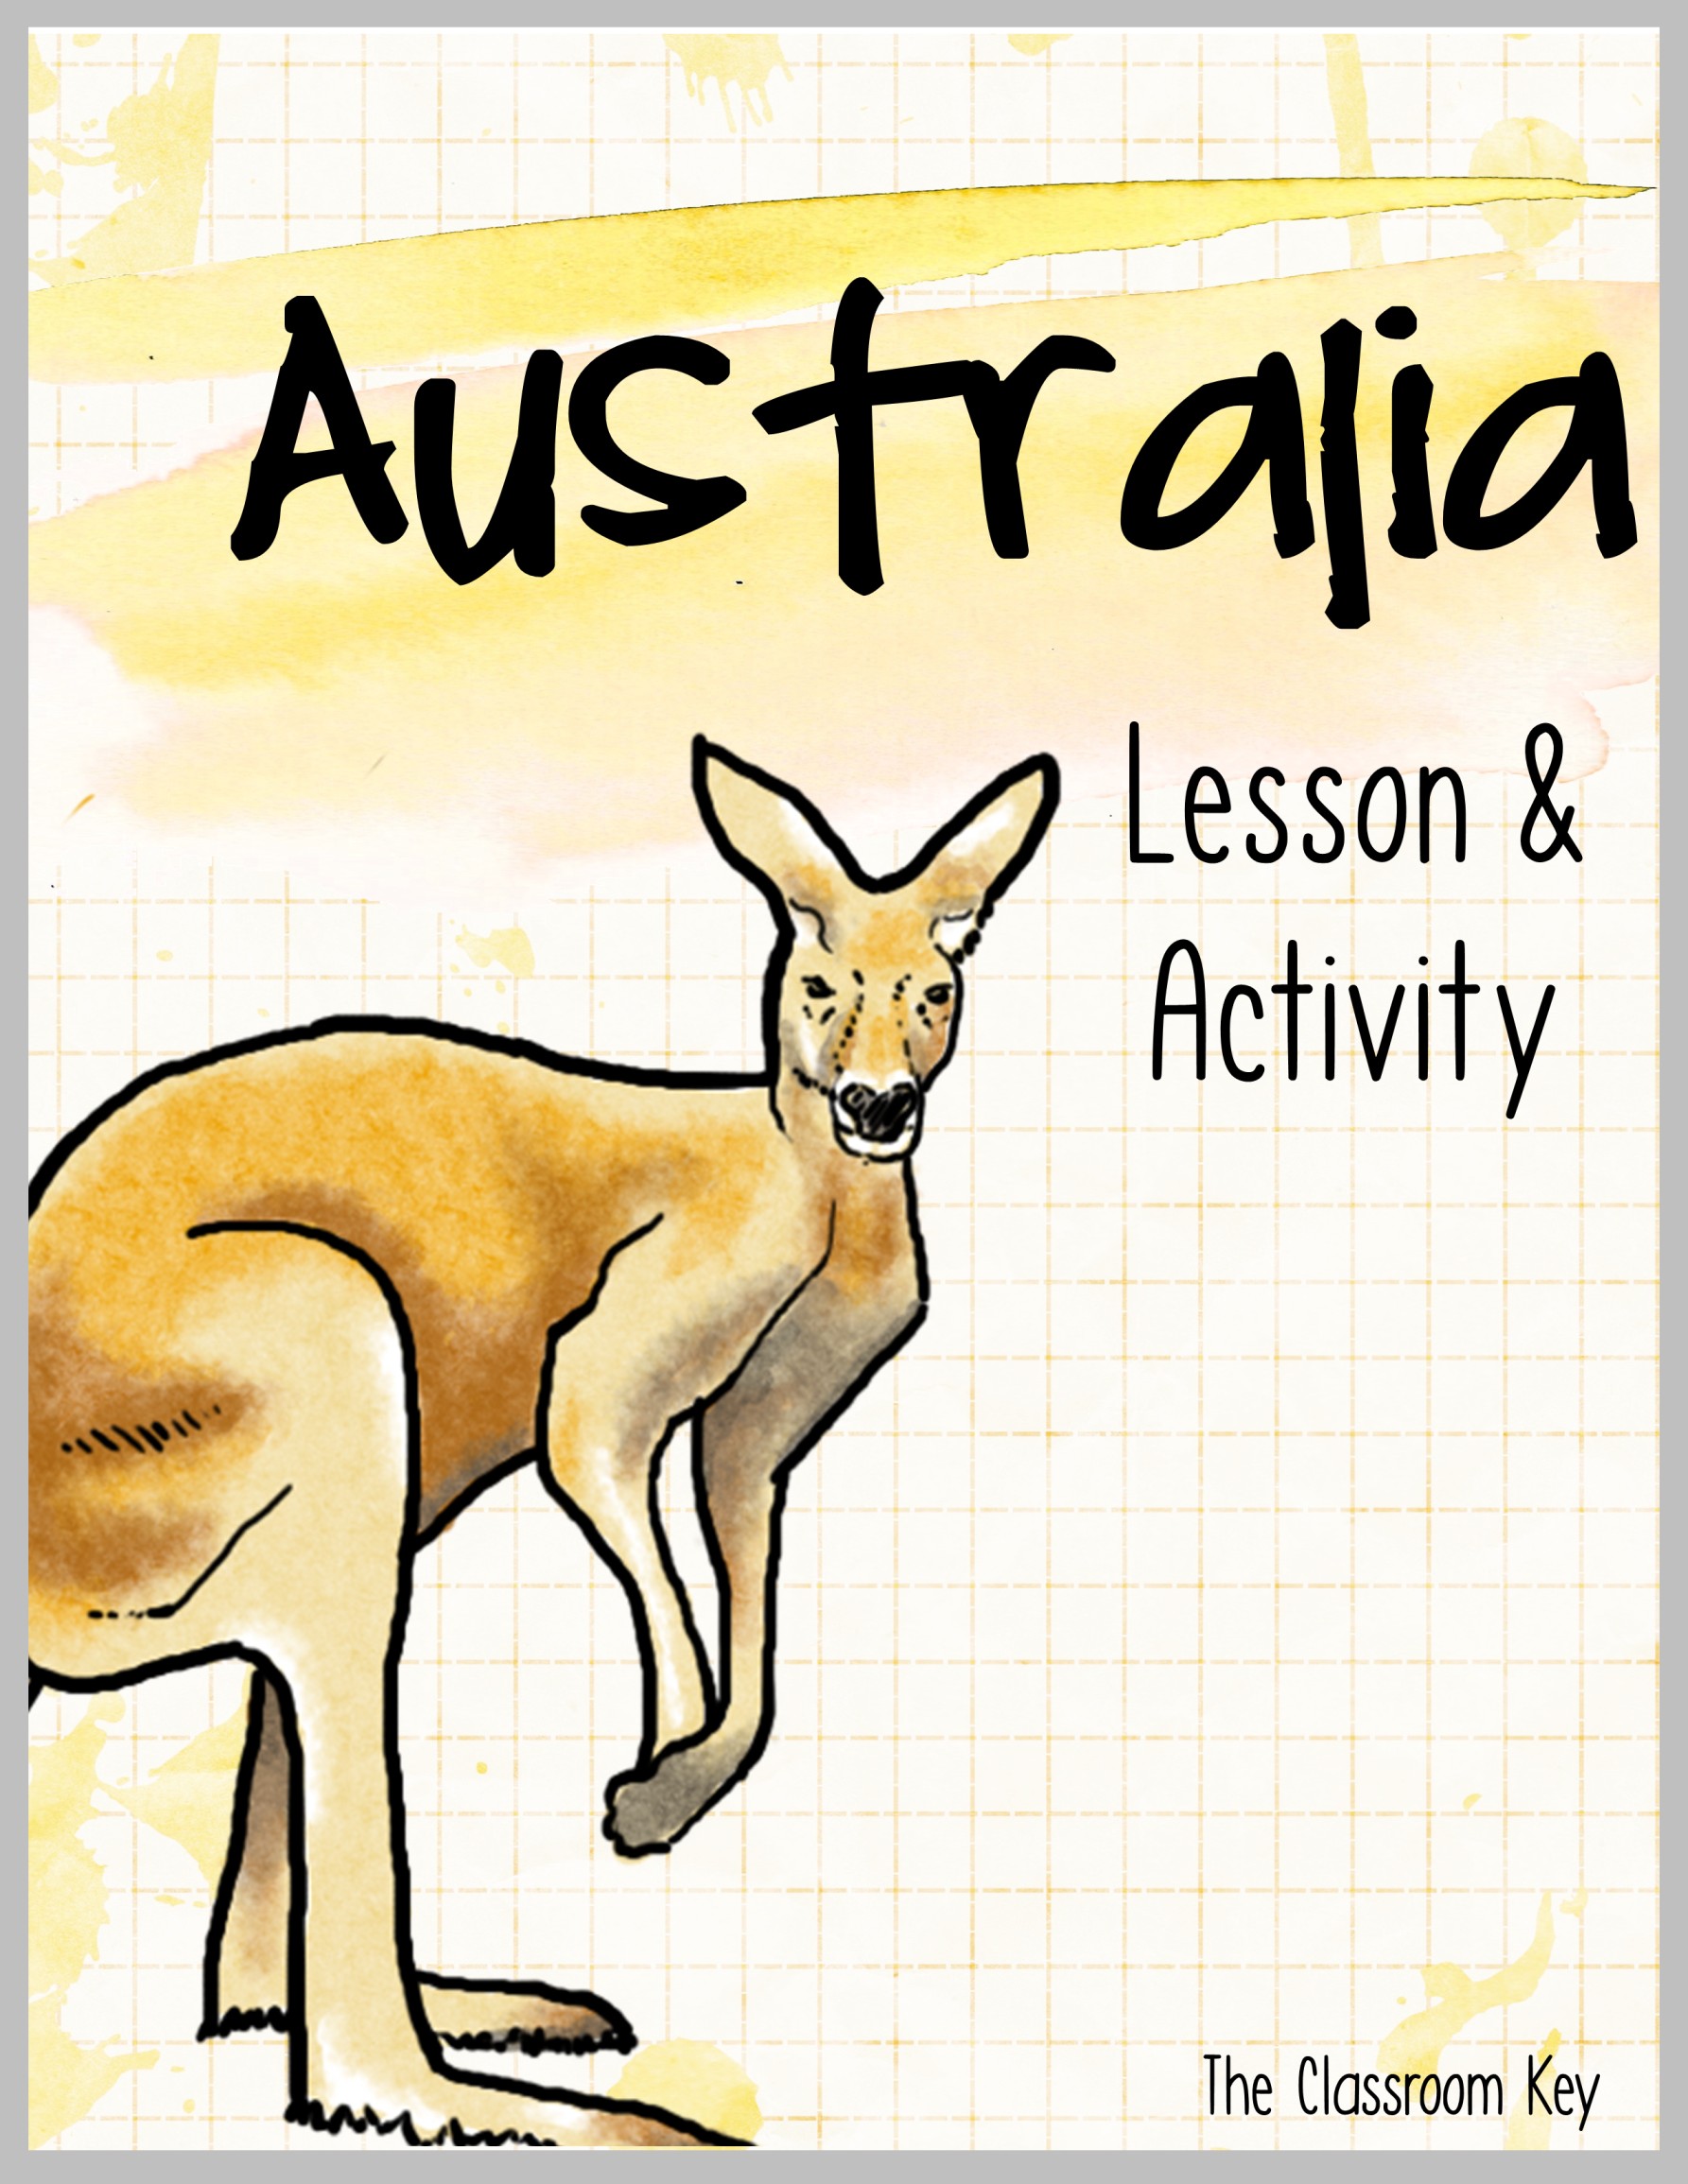 Australia Lesson and Activity - engage students with a powerpoint lesson and shutter book project, perfect for 1st, 2nd, or 3rd grade social studies or an around the world or multicultural night